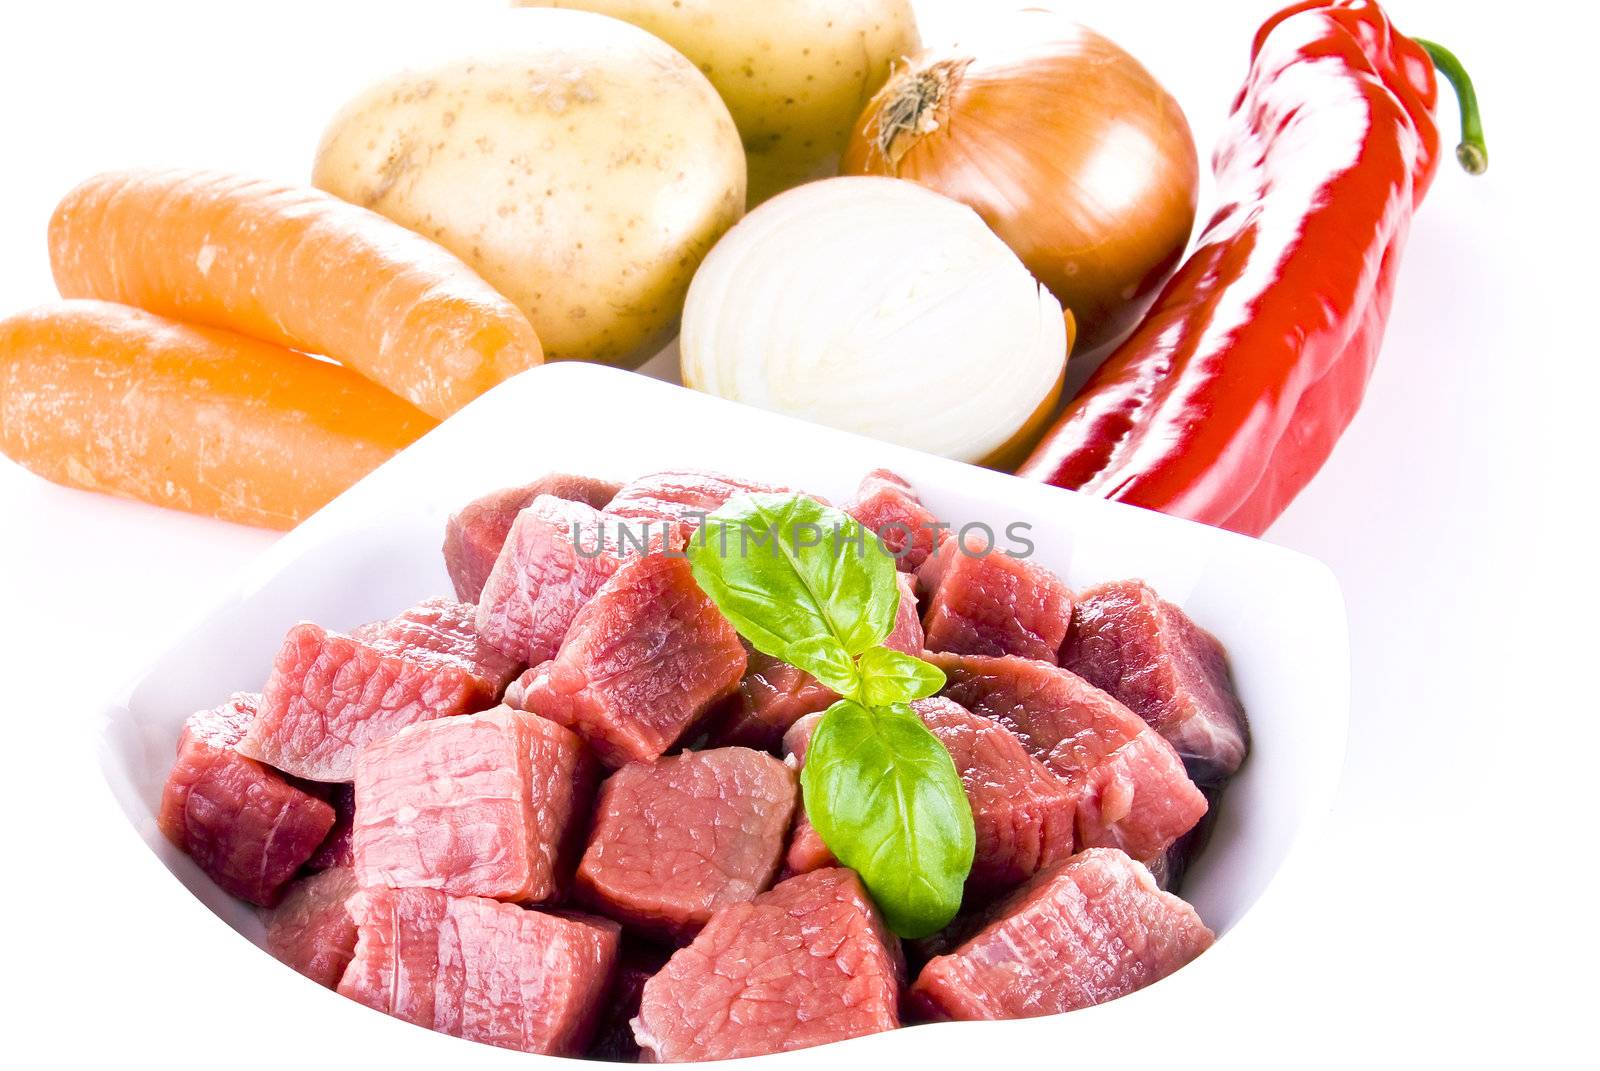 Diced beef with vegetables over white background